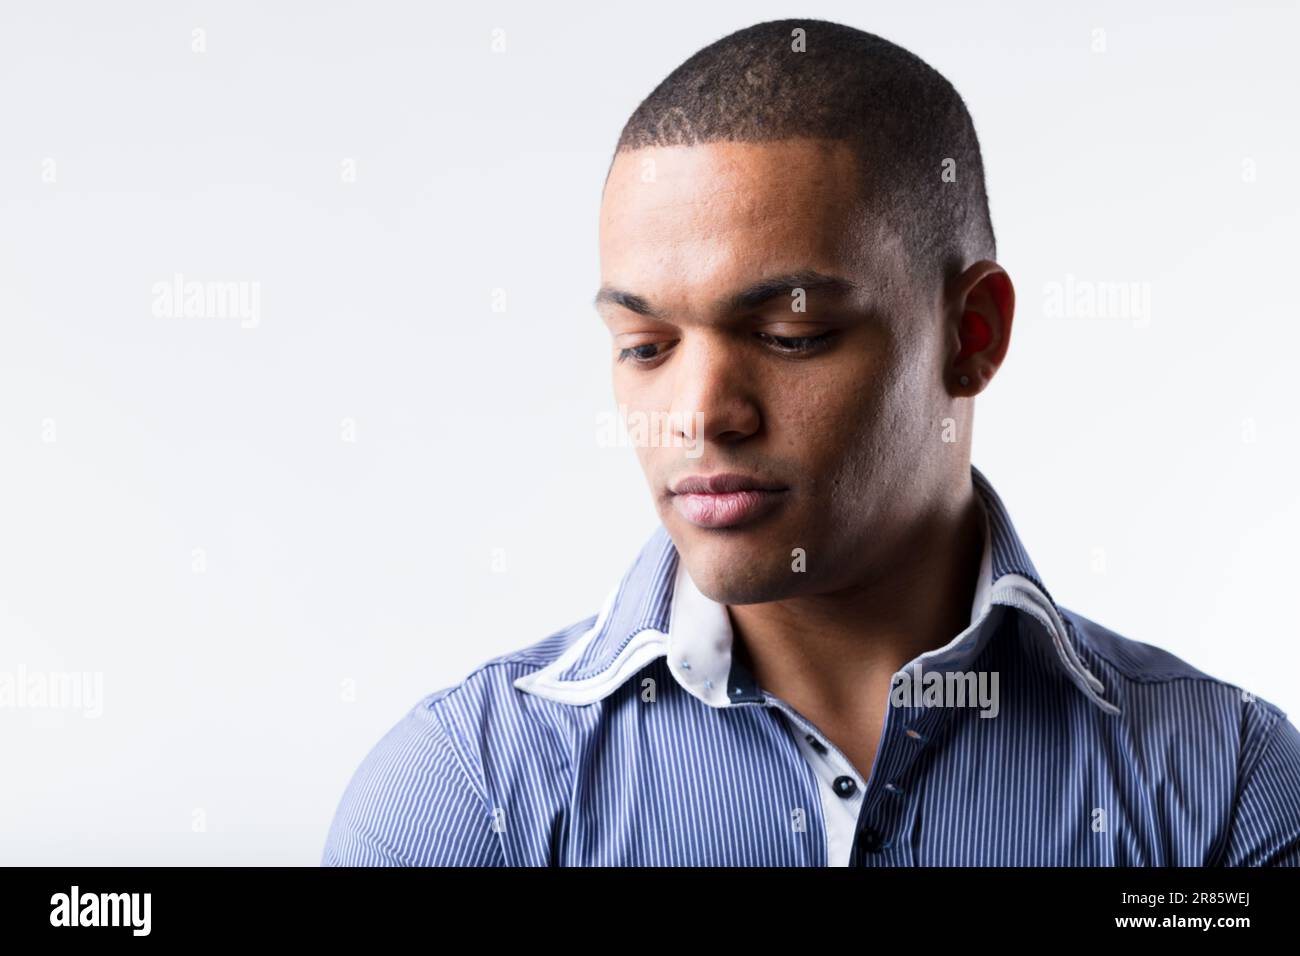 A well-off black man, part of high-earning middle class, wears a blue polo-style shirt. He appears thoughtful and perhaps worried, troubled, sad, seri Stock Photo